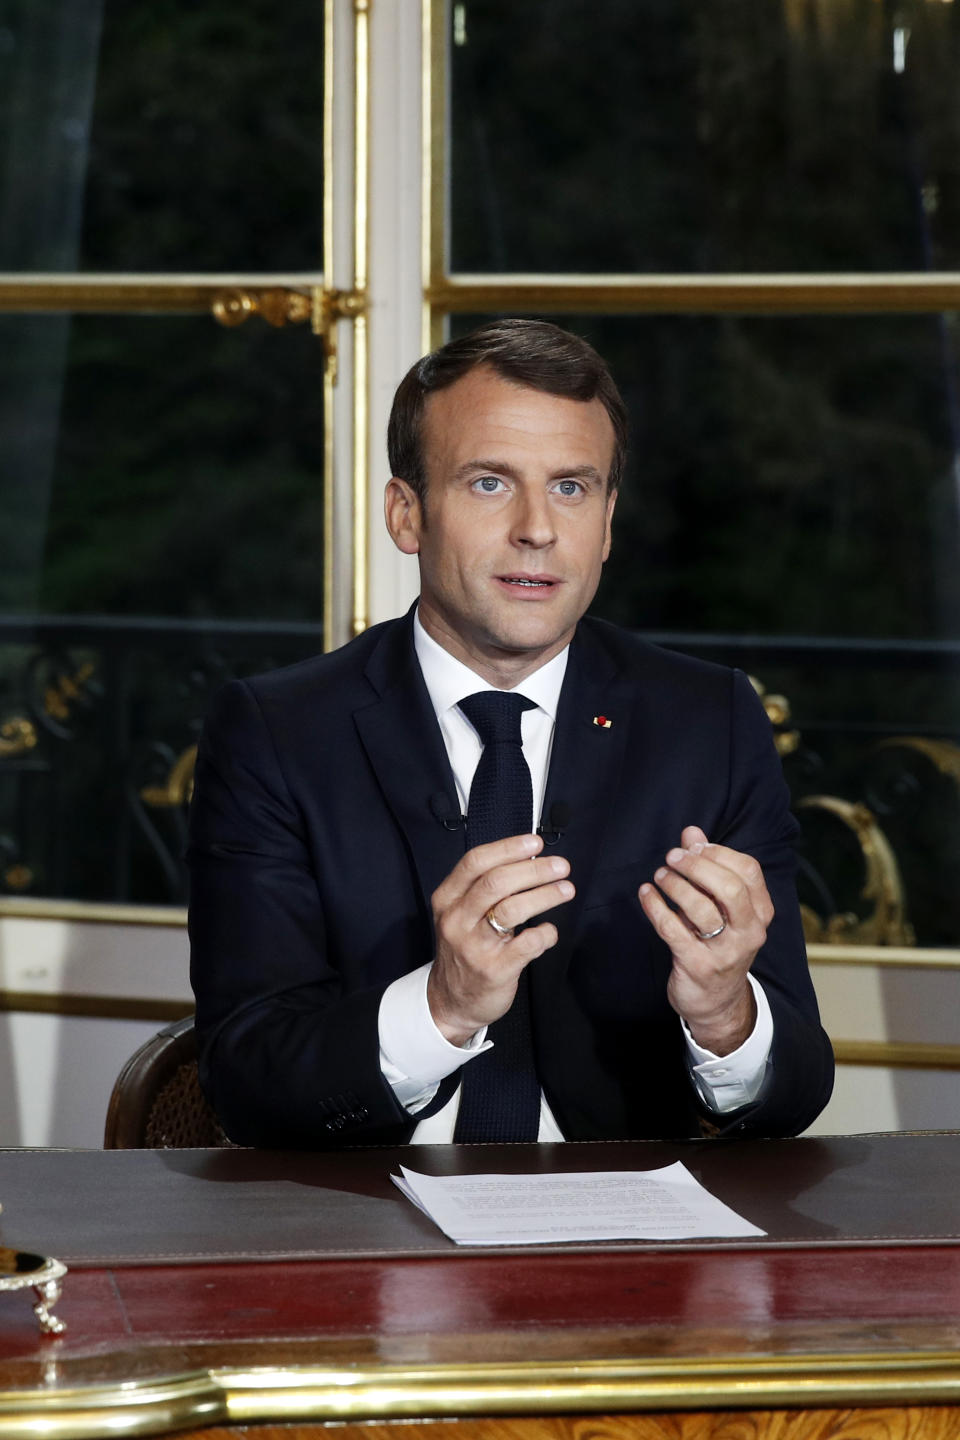 French President Emmanuel Macron gestures at his desk after addressing the French nation following a massive fire at Notre Dame Cathedral, at Elysee Palace in Paris, Tuesday, April 16 2019. Macron said he wants to see the fire-ravaged Notre Dame cathedral to be rebuilt within five years. (Yoan Valat, Pool via AP)